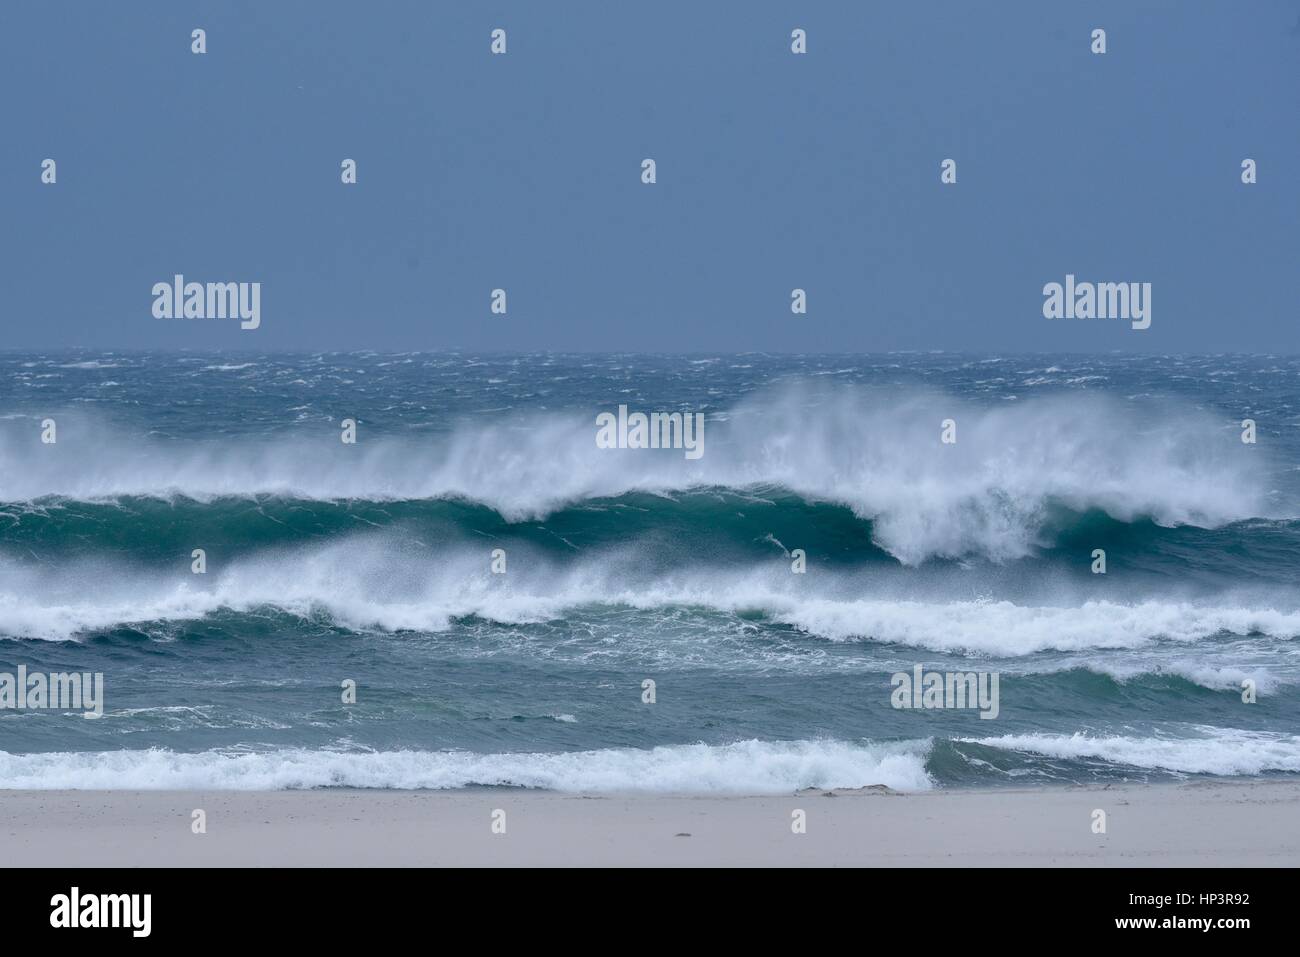 Severe weather, high surf and waves crash upon shore of Mission Beach, San Diego,  California. Stock Photo